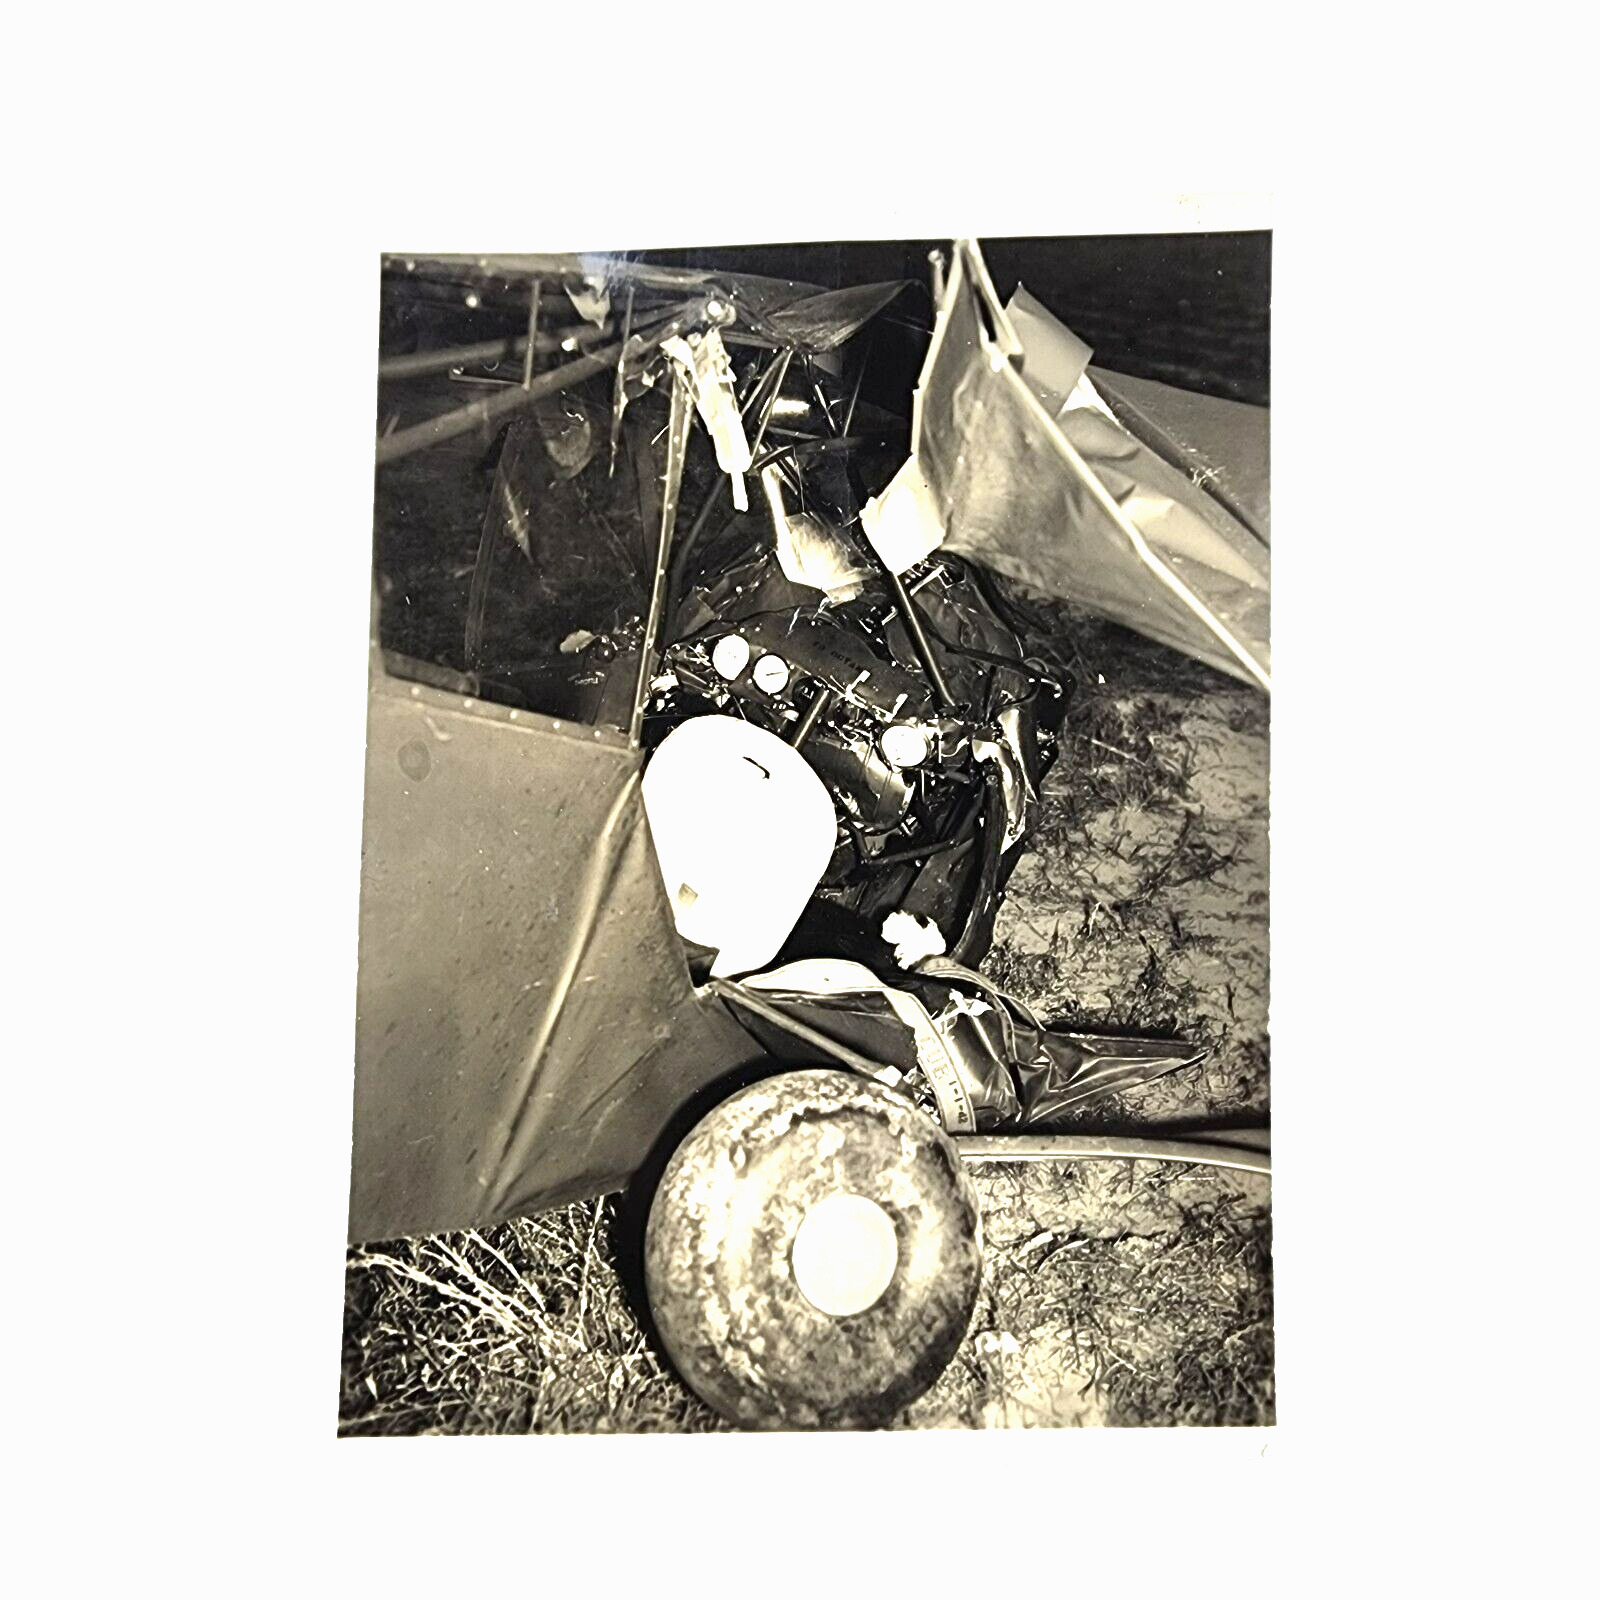 WW2 Photograph, Crashed US Air Corp Piper Cub Airplane